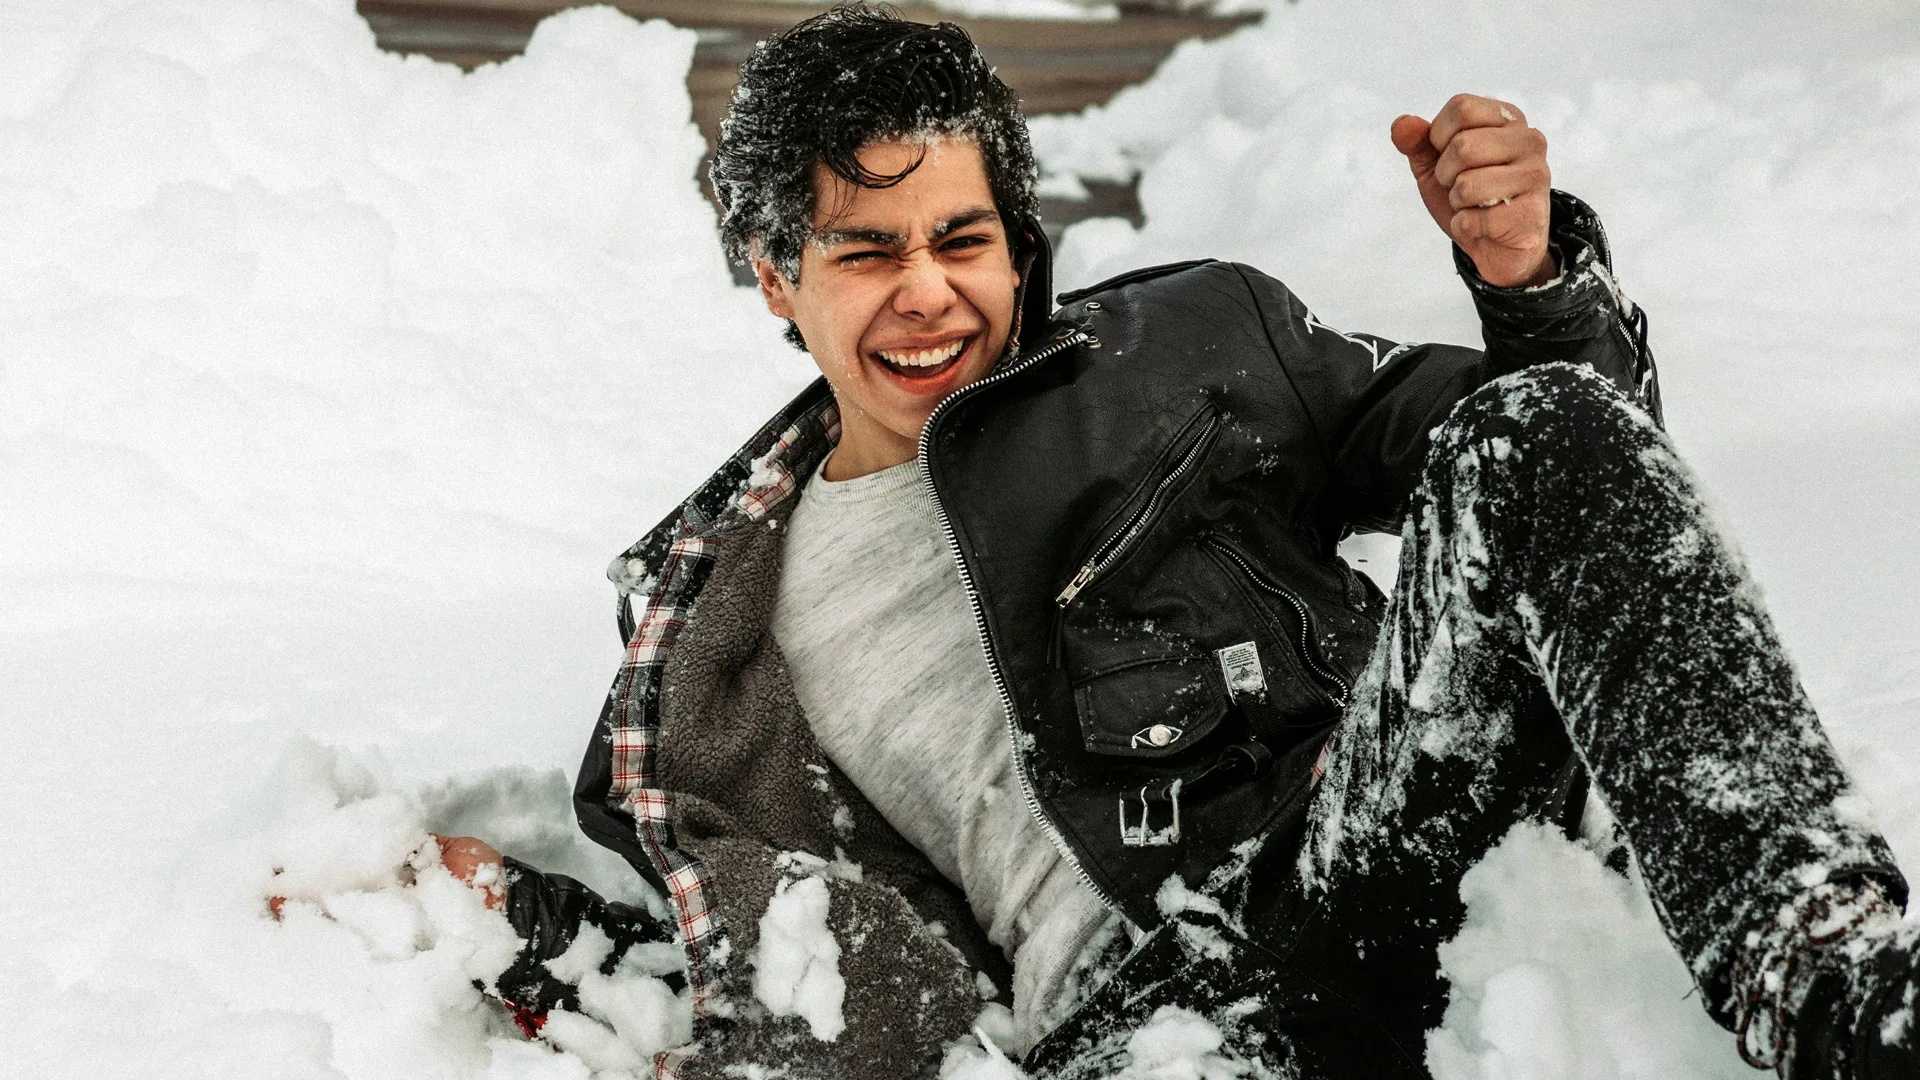 Photograph of a man laughing in the snow